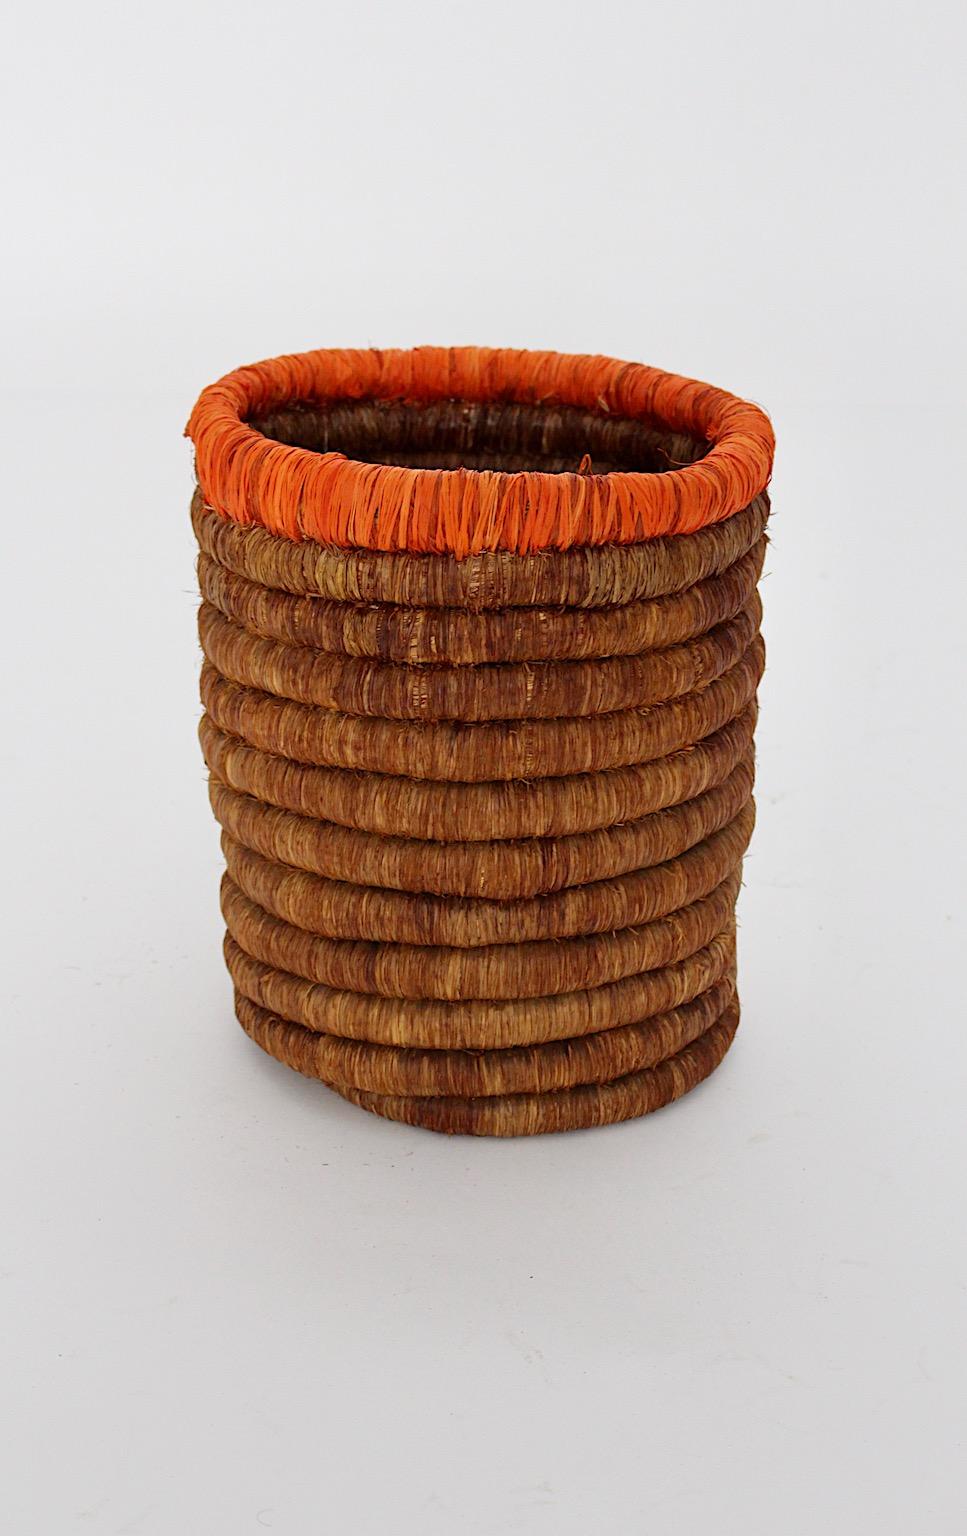 Mid Century Modern organic vintage basket or paper basket from raffia or sisal in brown and orange colors manufactured Austria 1950s.
The basket shows beautiful woven network in smooth warm colors.
We decided to cross 